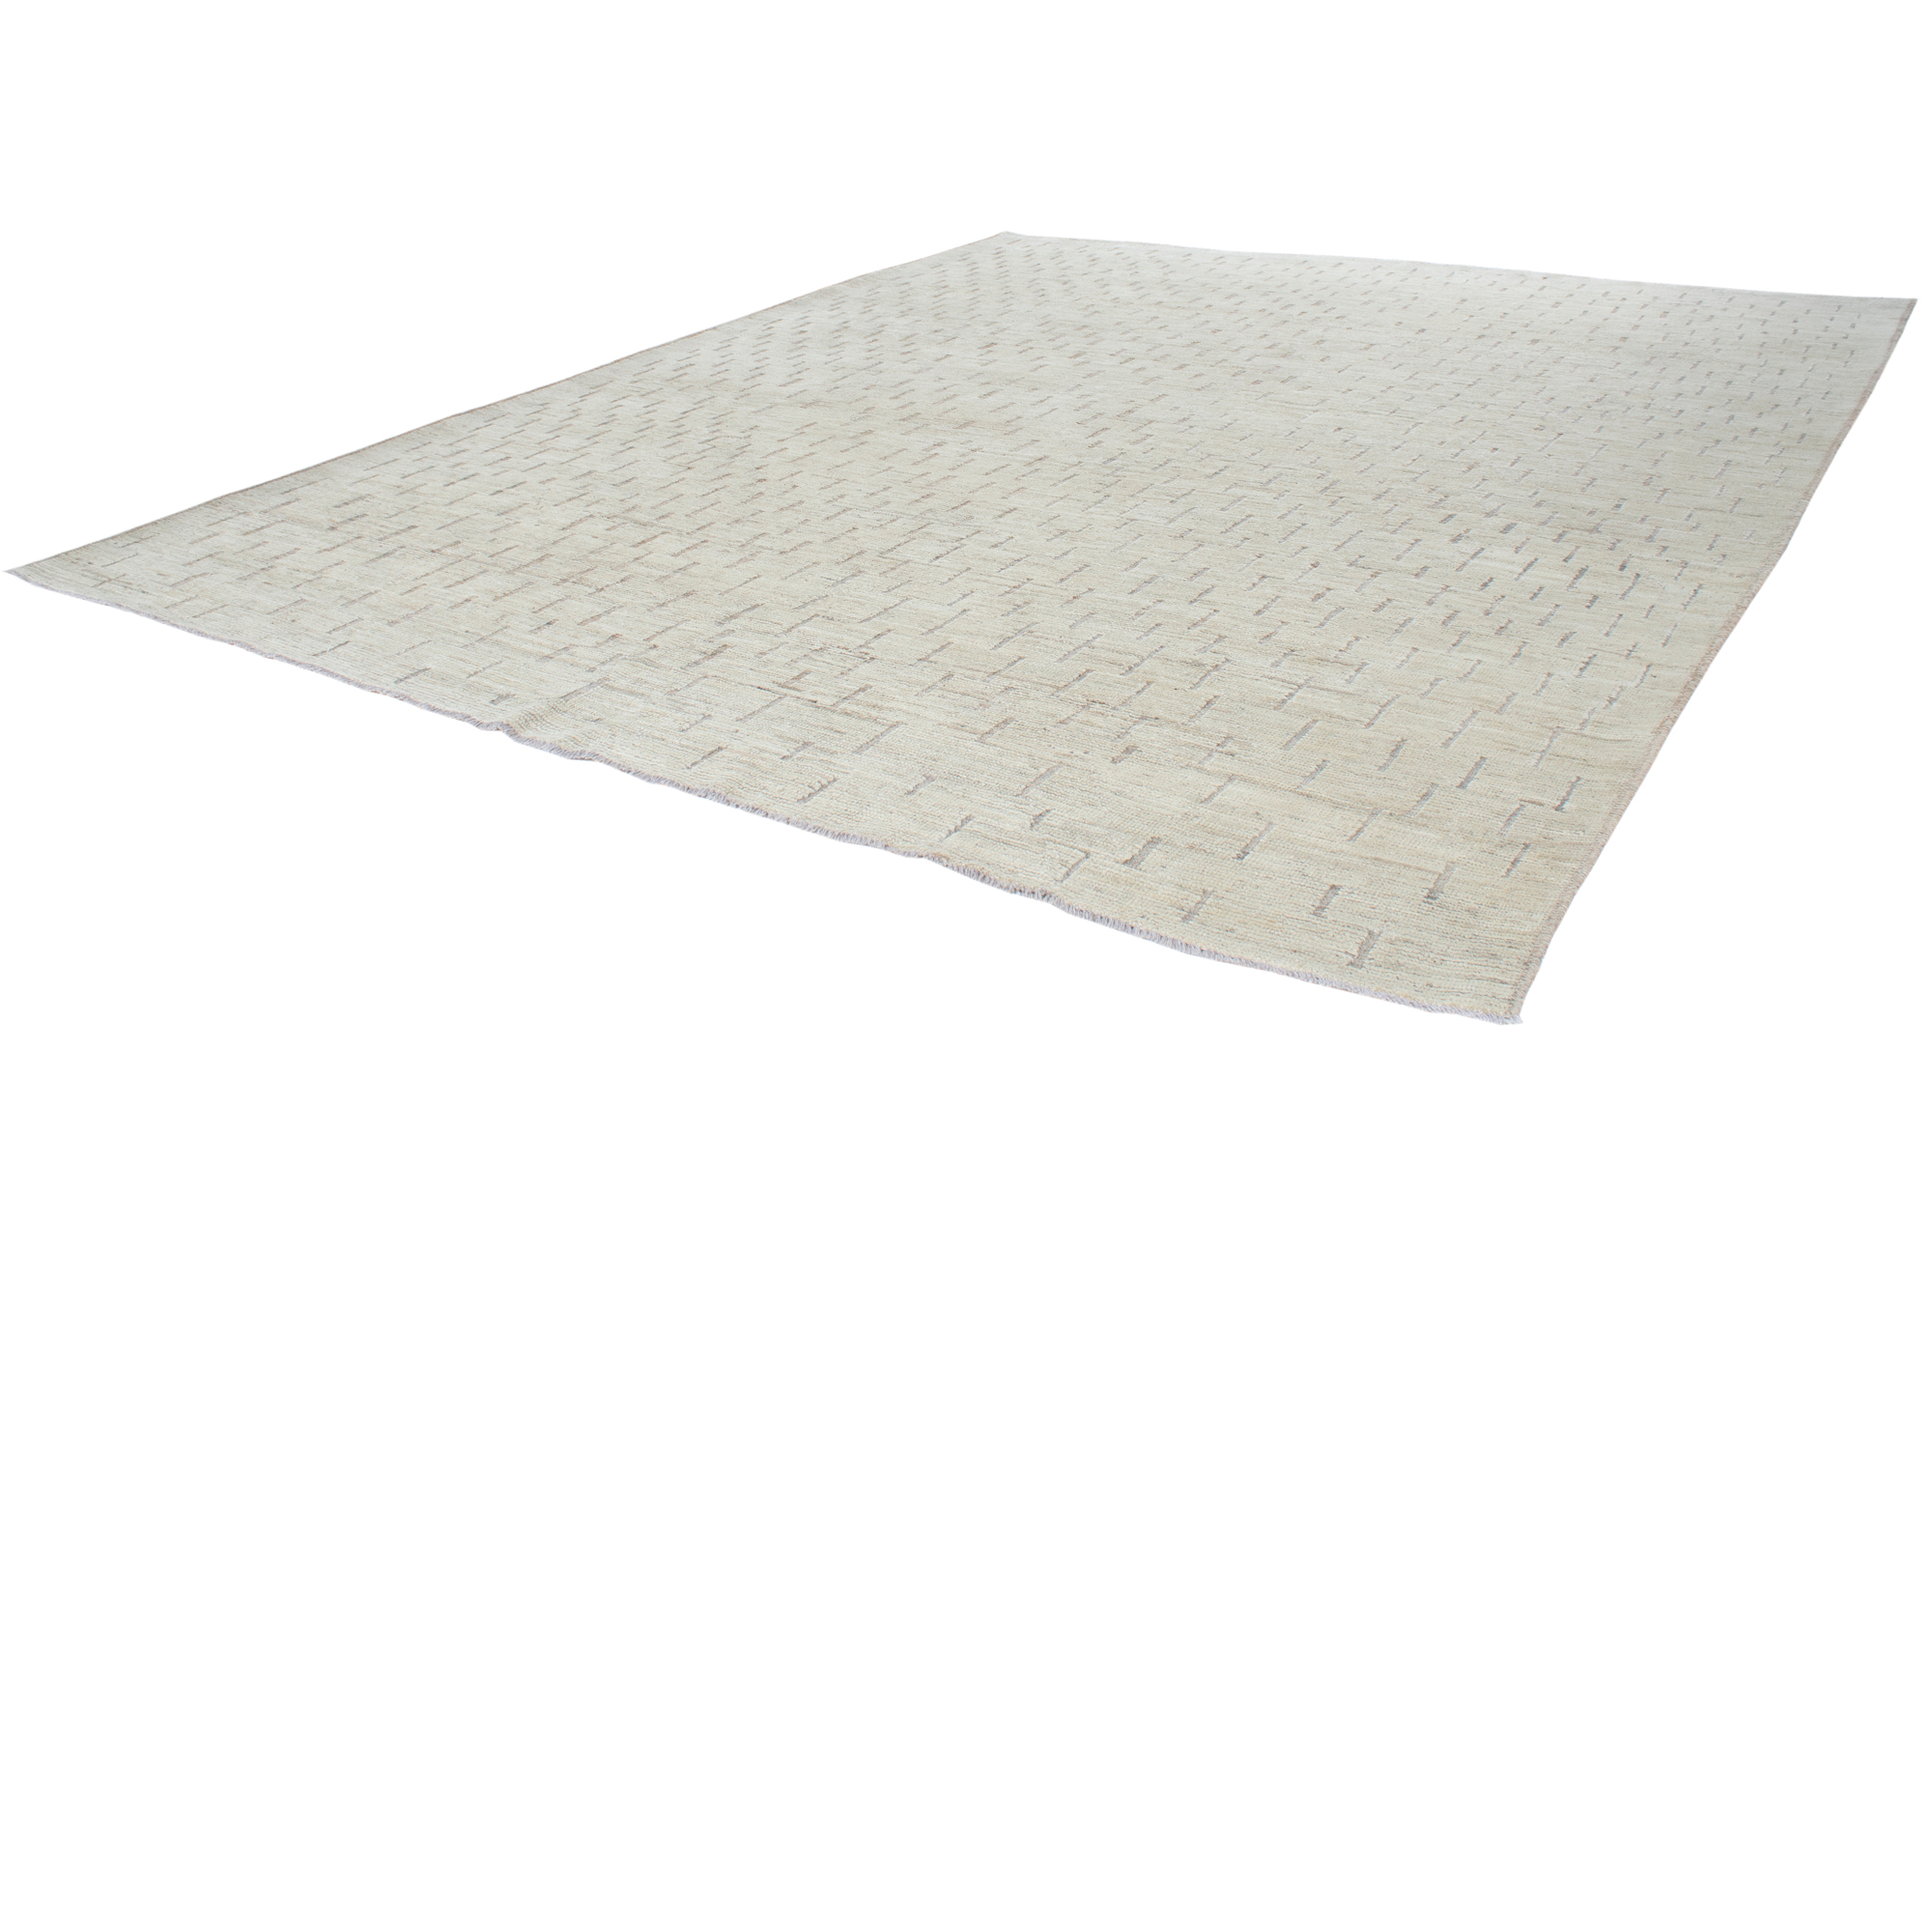 Marbella Rug is a hand-knotted modern piece with a combination of beige and grey tones. 